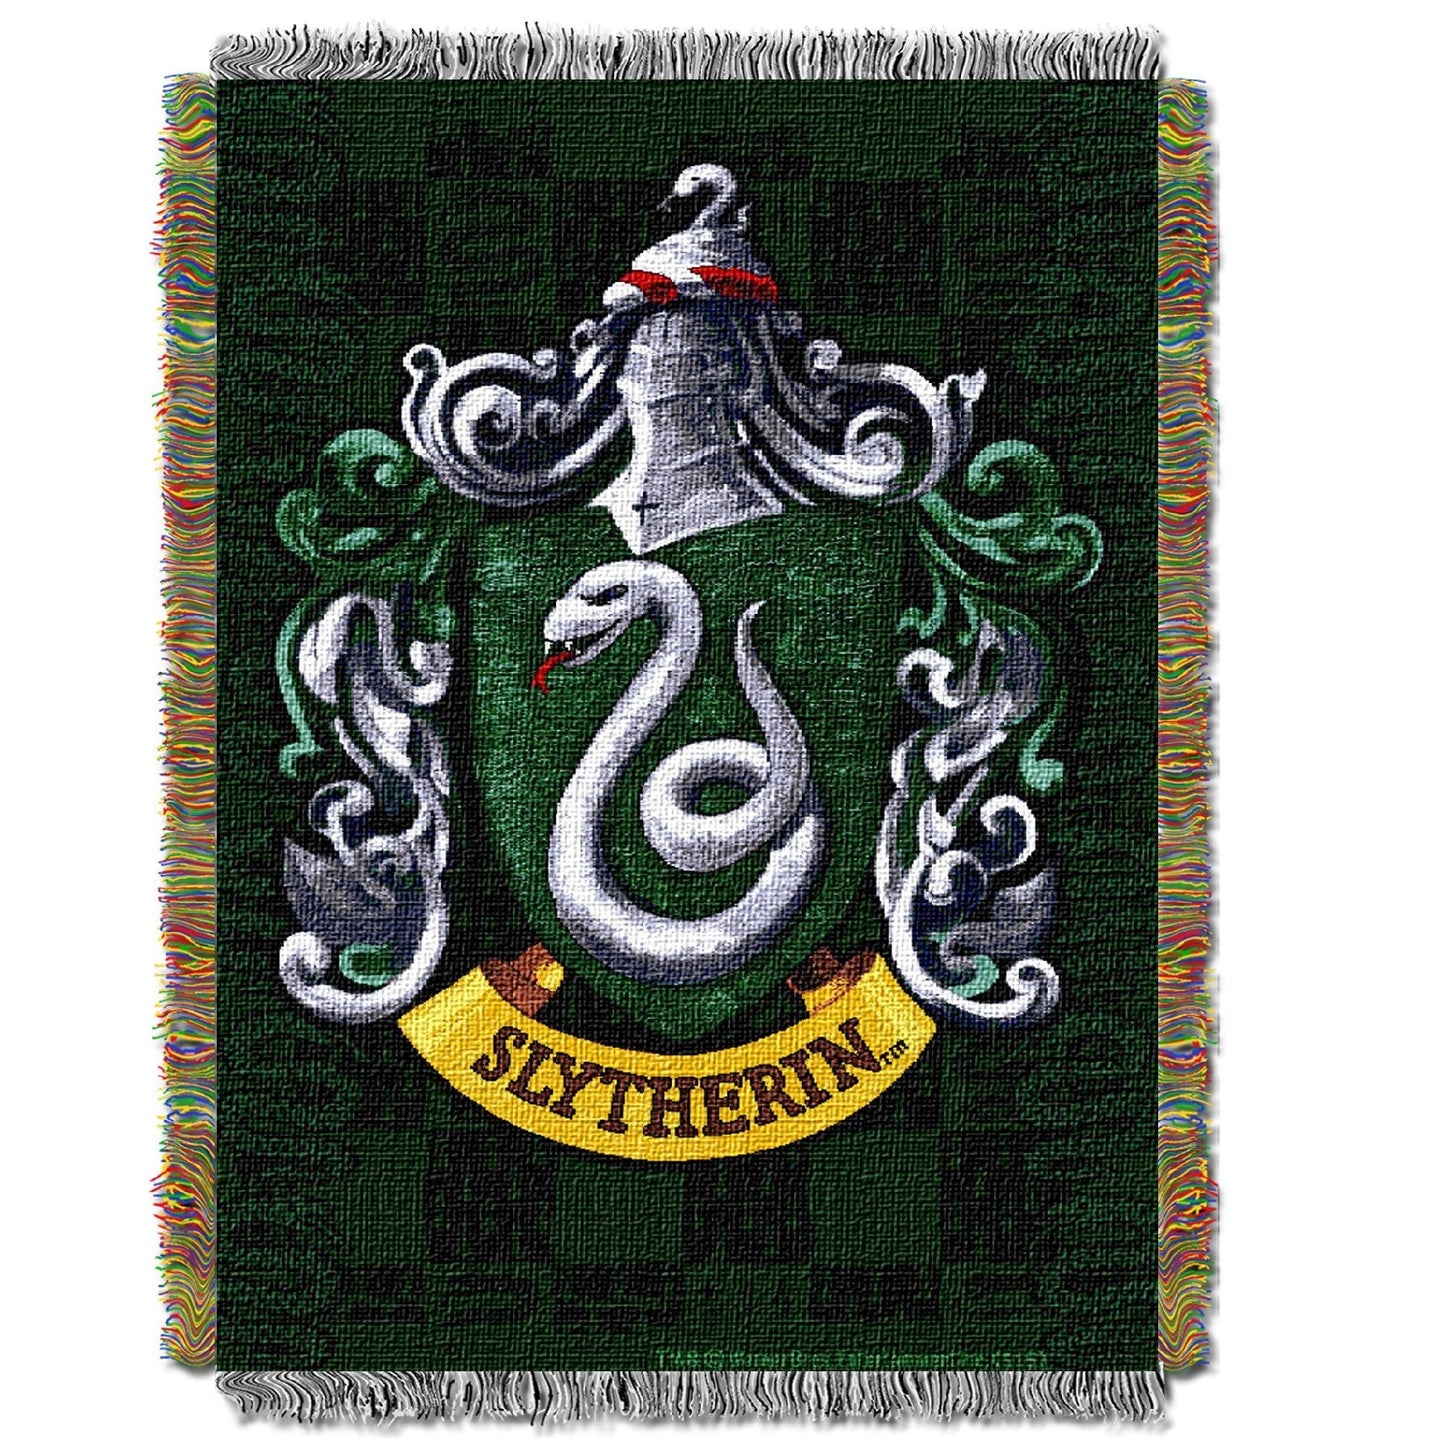 Harry Potter Slytherin Shield Licensed 48"x 60" Woven Tapestry Throw